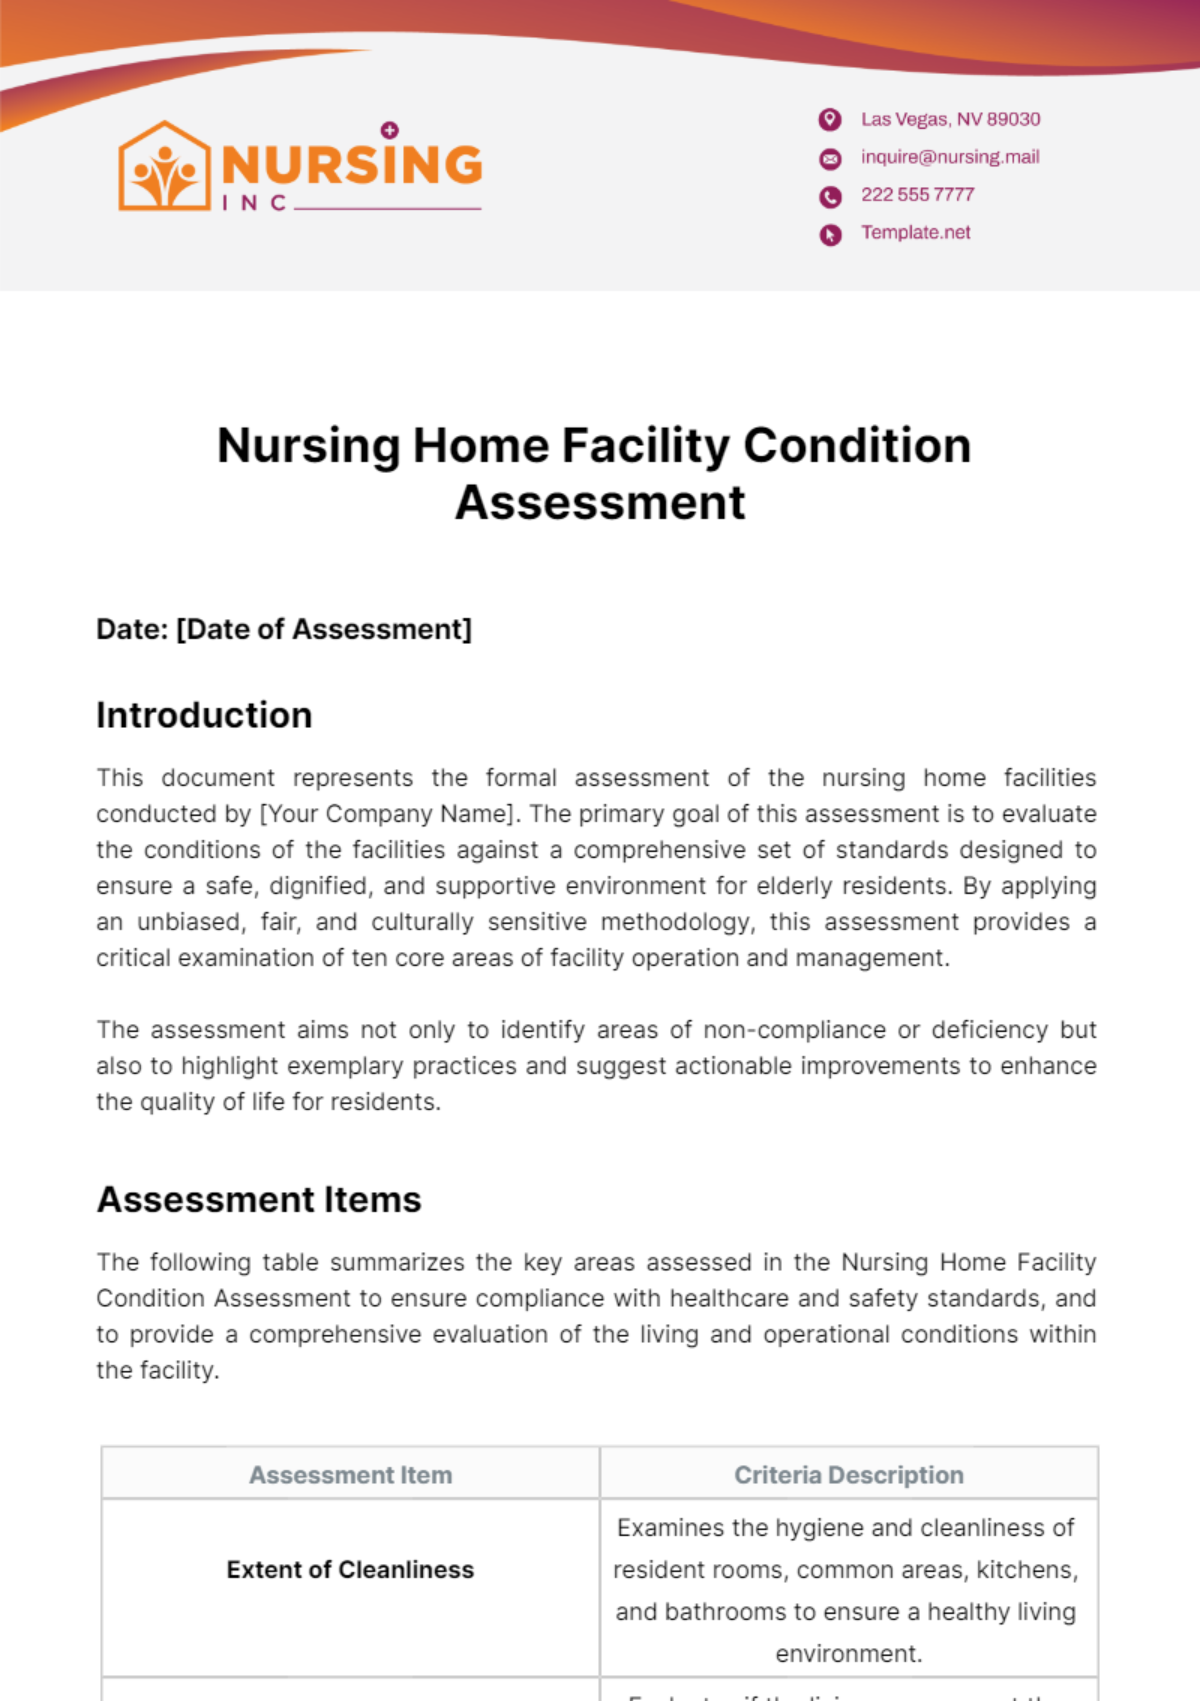 Free Nursing Home Facility Condition Assessment Template